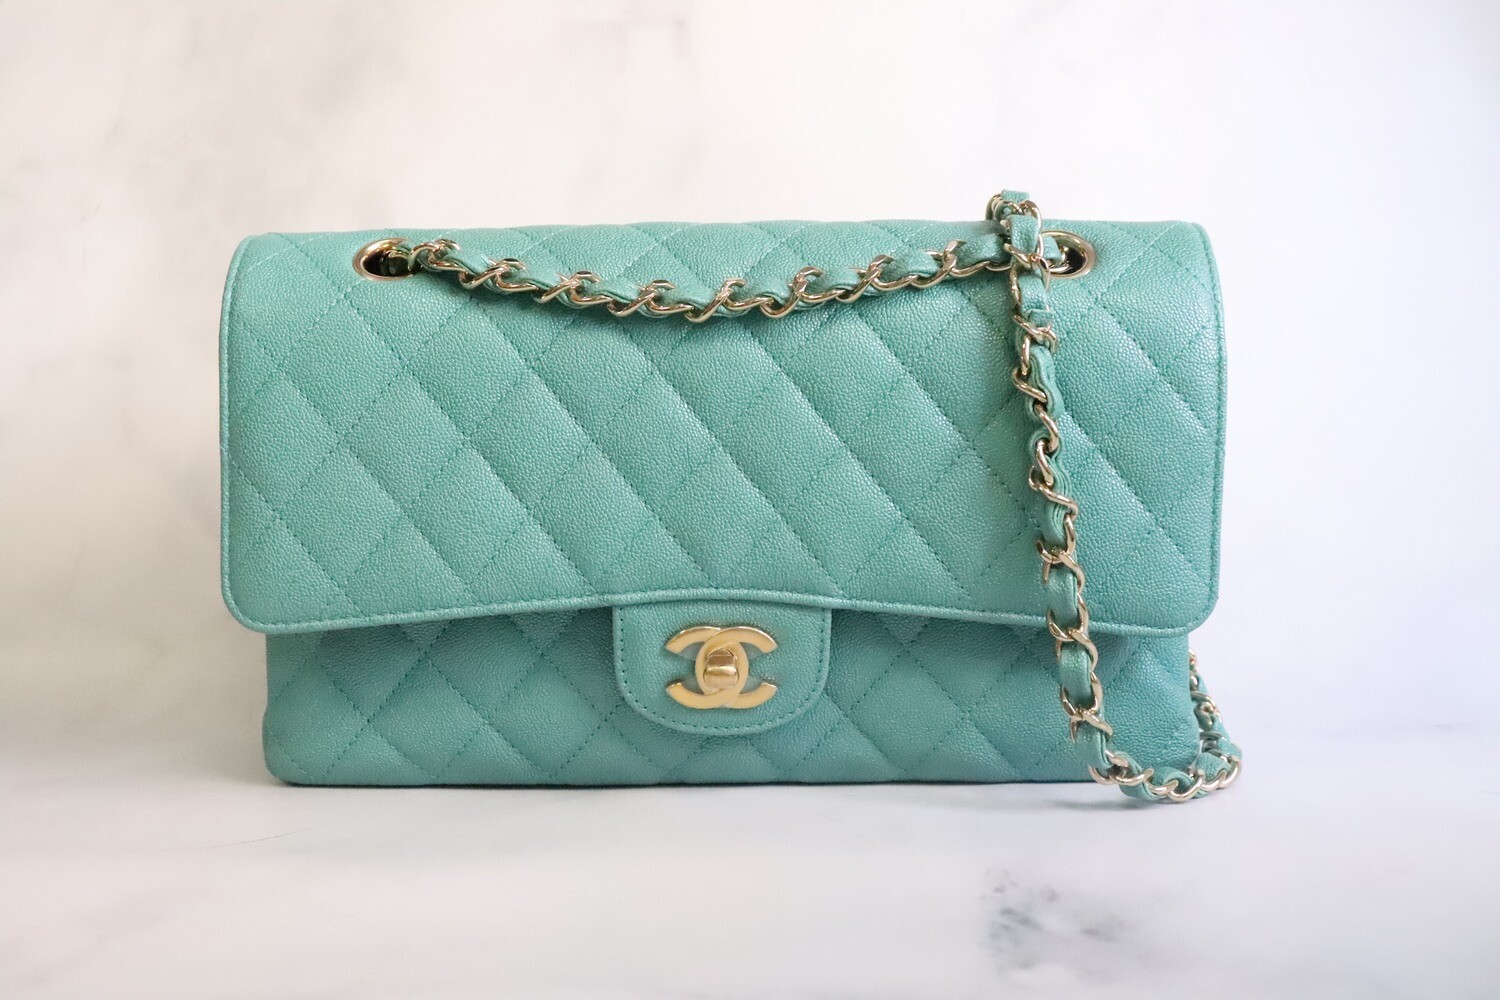 Chanel Small Classic Double Flap Turquoise Iridescent Caviar Light